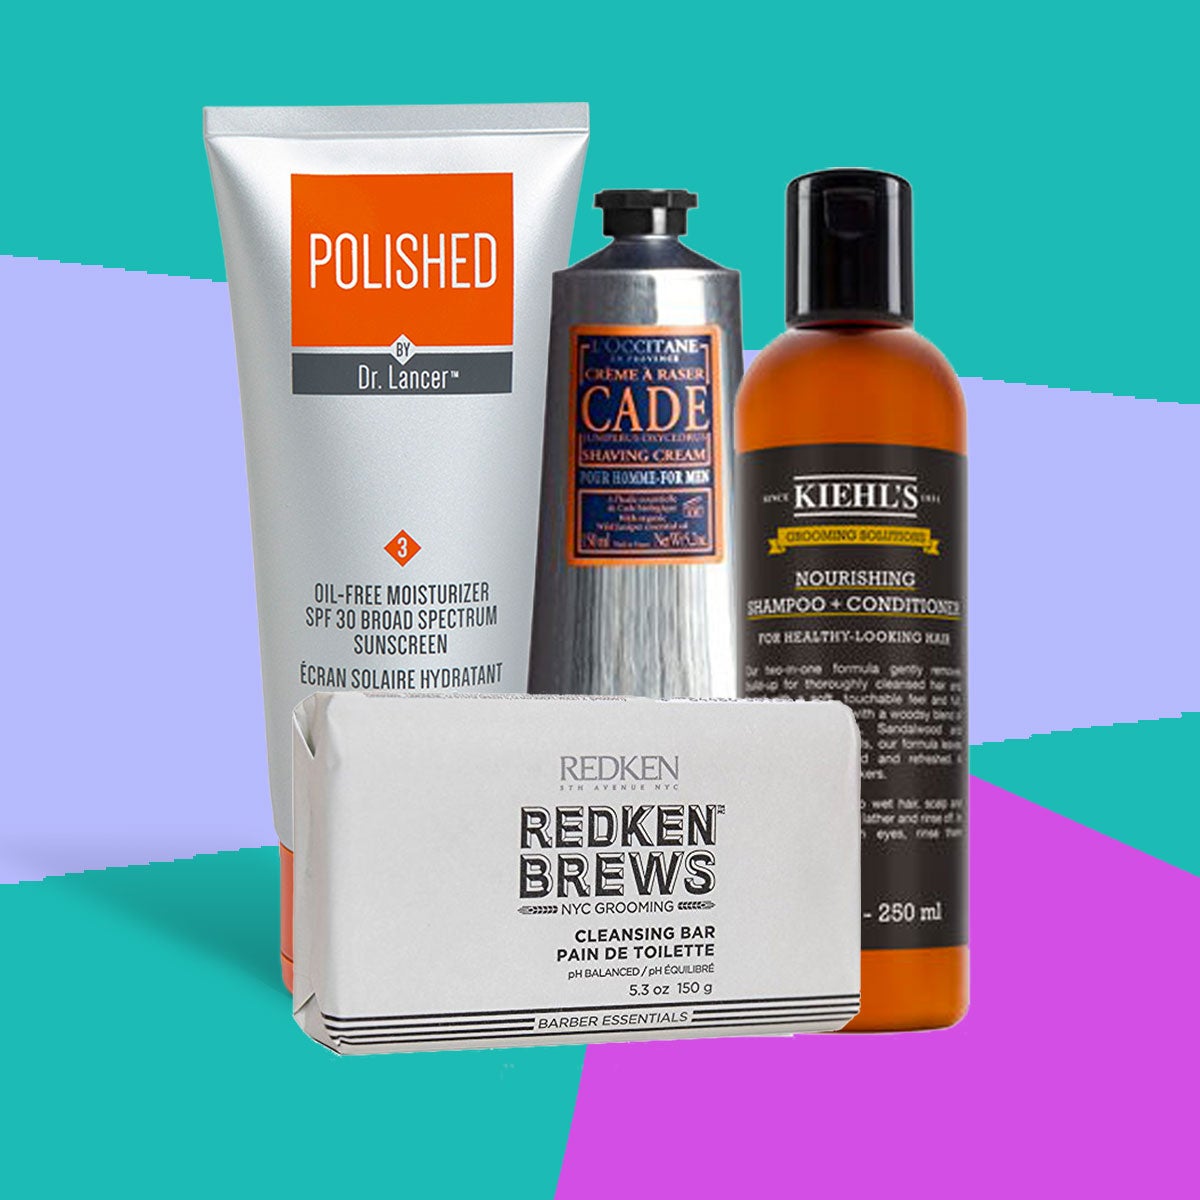 Men's Beauty: The Editor Approved Grooming Products To Buy For Bae
